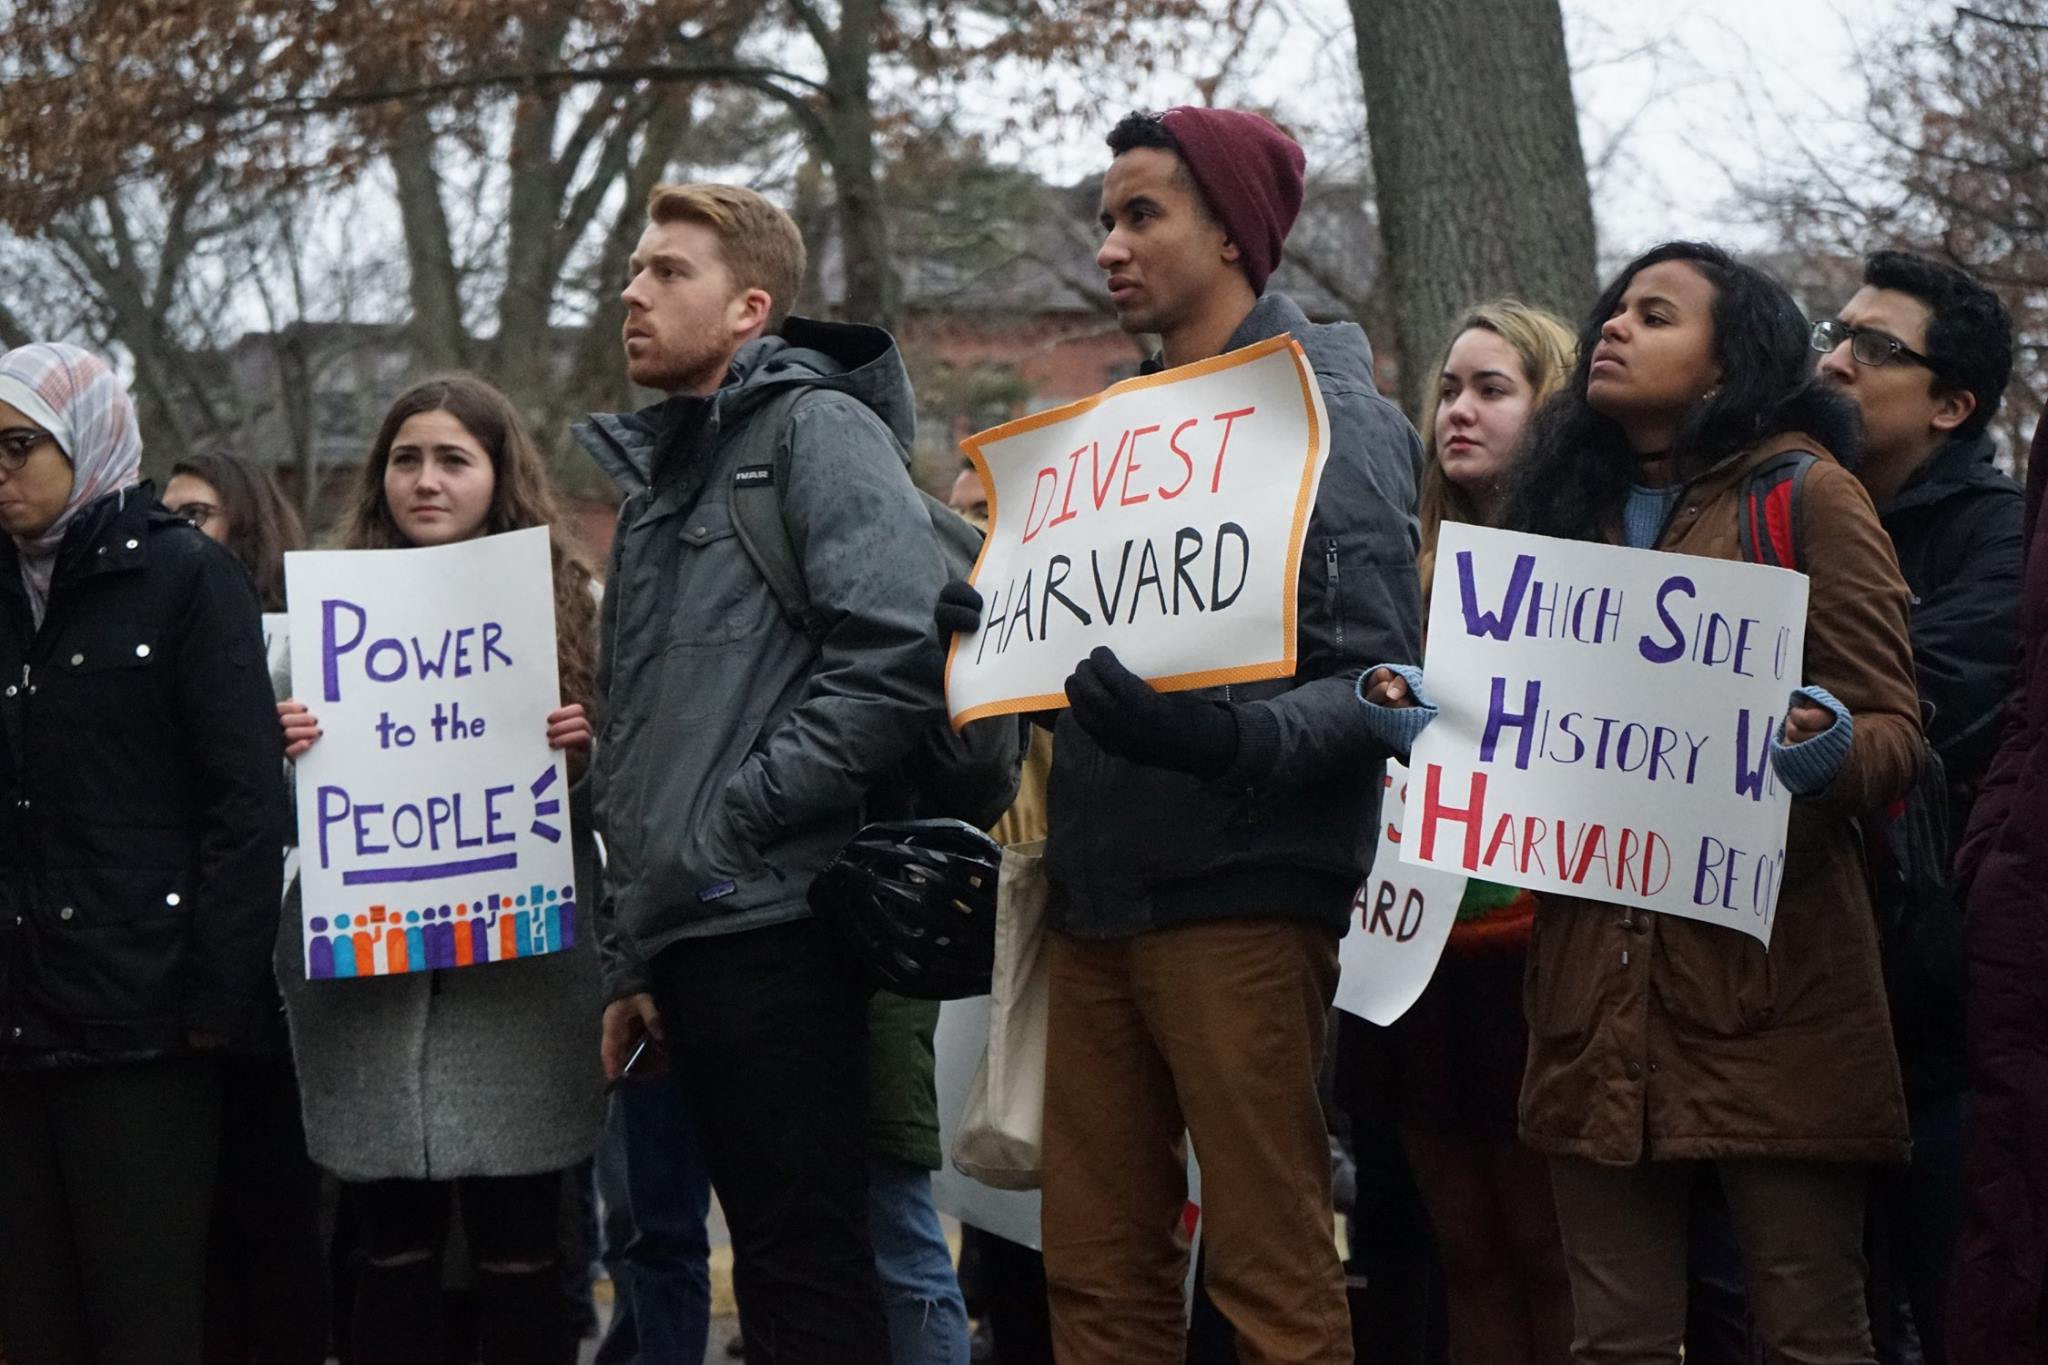 Protests at Harvard to asking for fossil fuel divestment